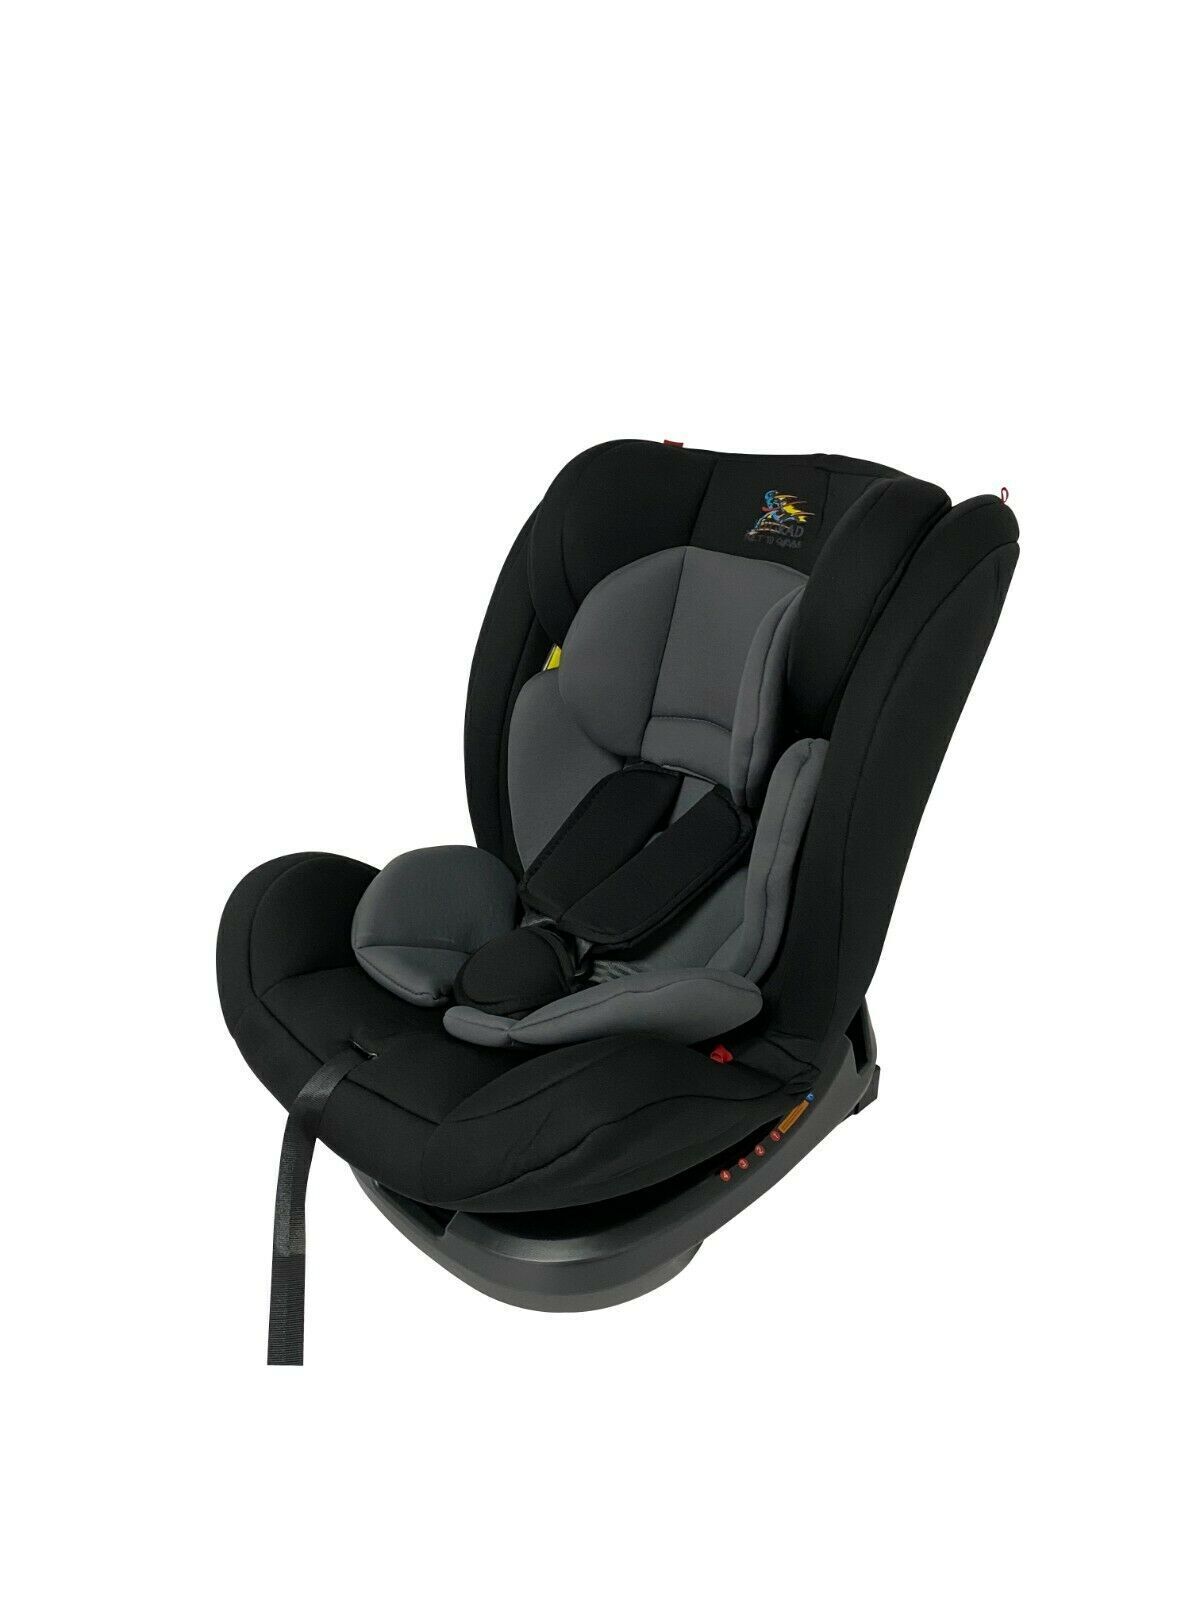 ISOFIX Baby Car Seat Babies Booster Car Seat 360 Swivel Group 0123 From 0-36Kg